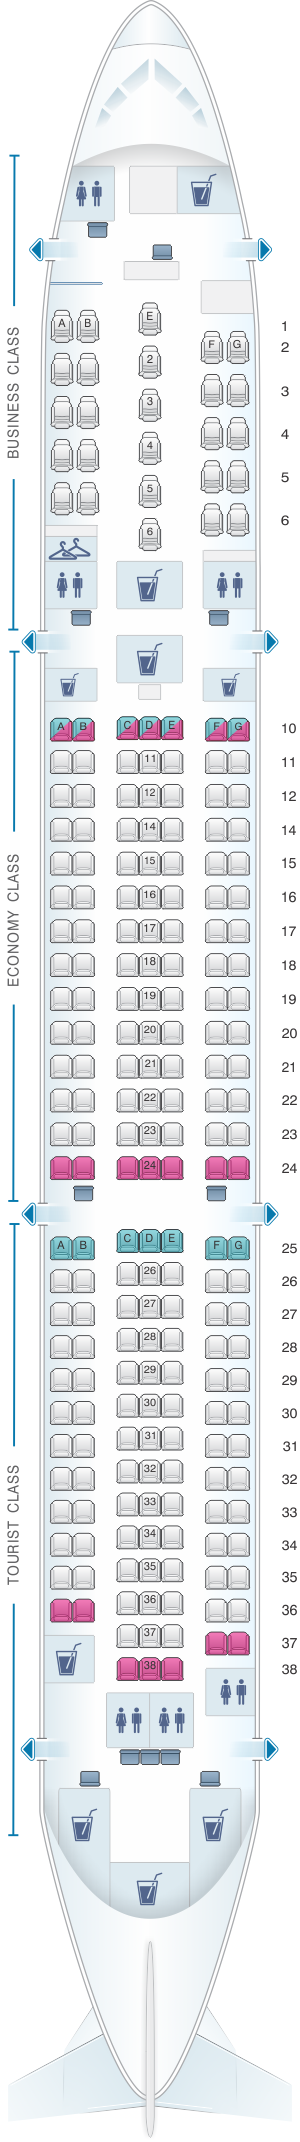 Seat map for Transaero Airlines Boeing B767 300 Config. 2